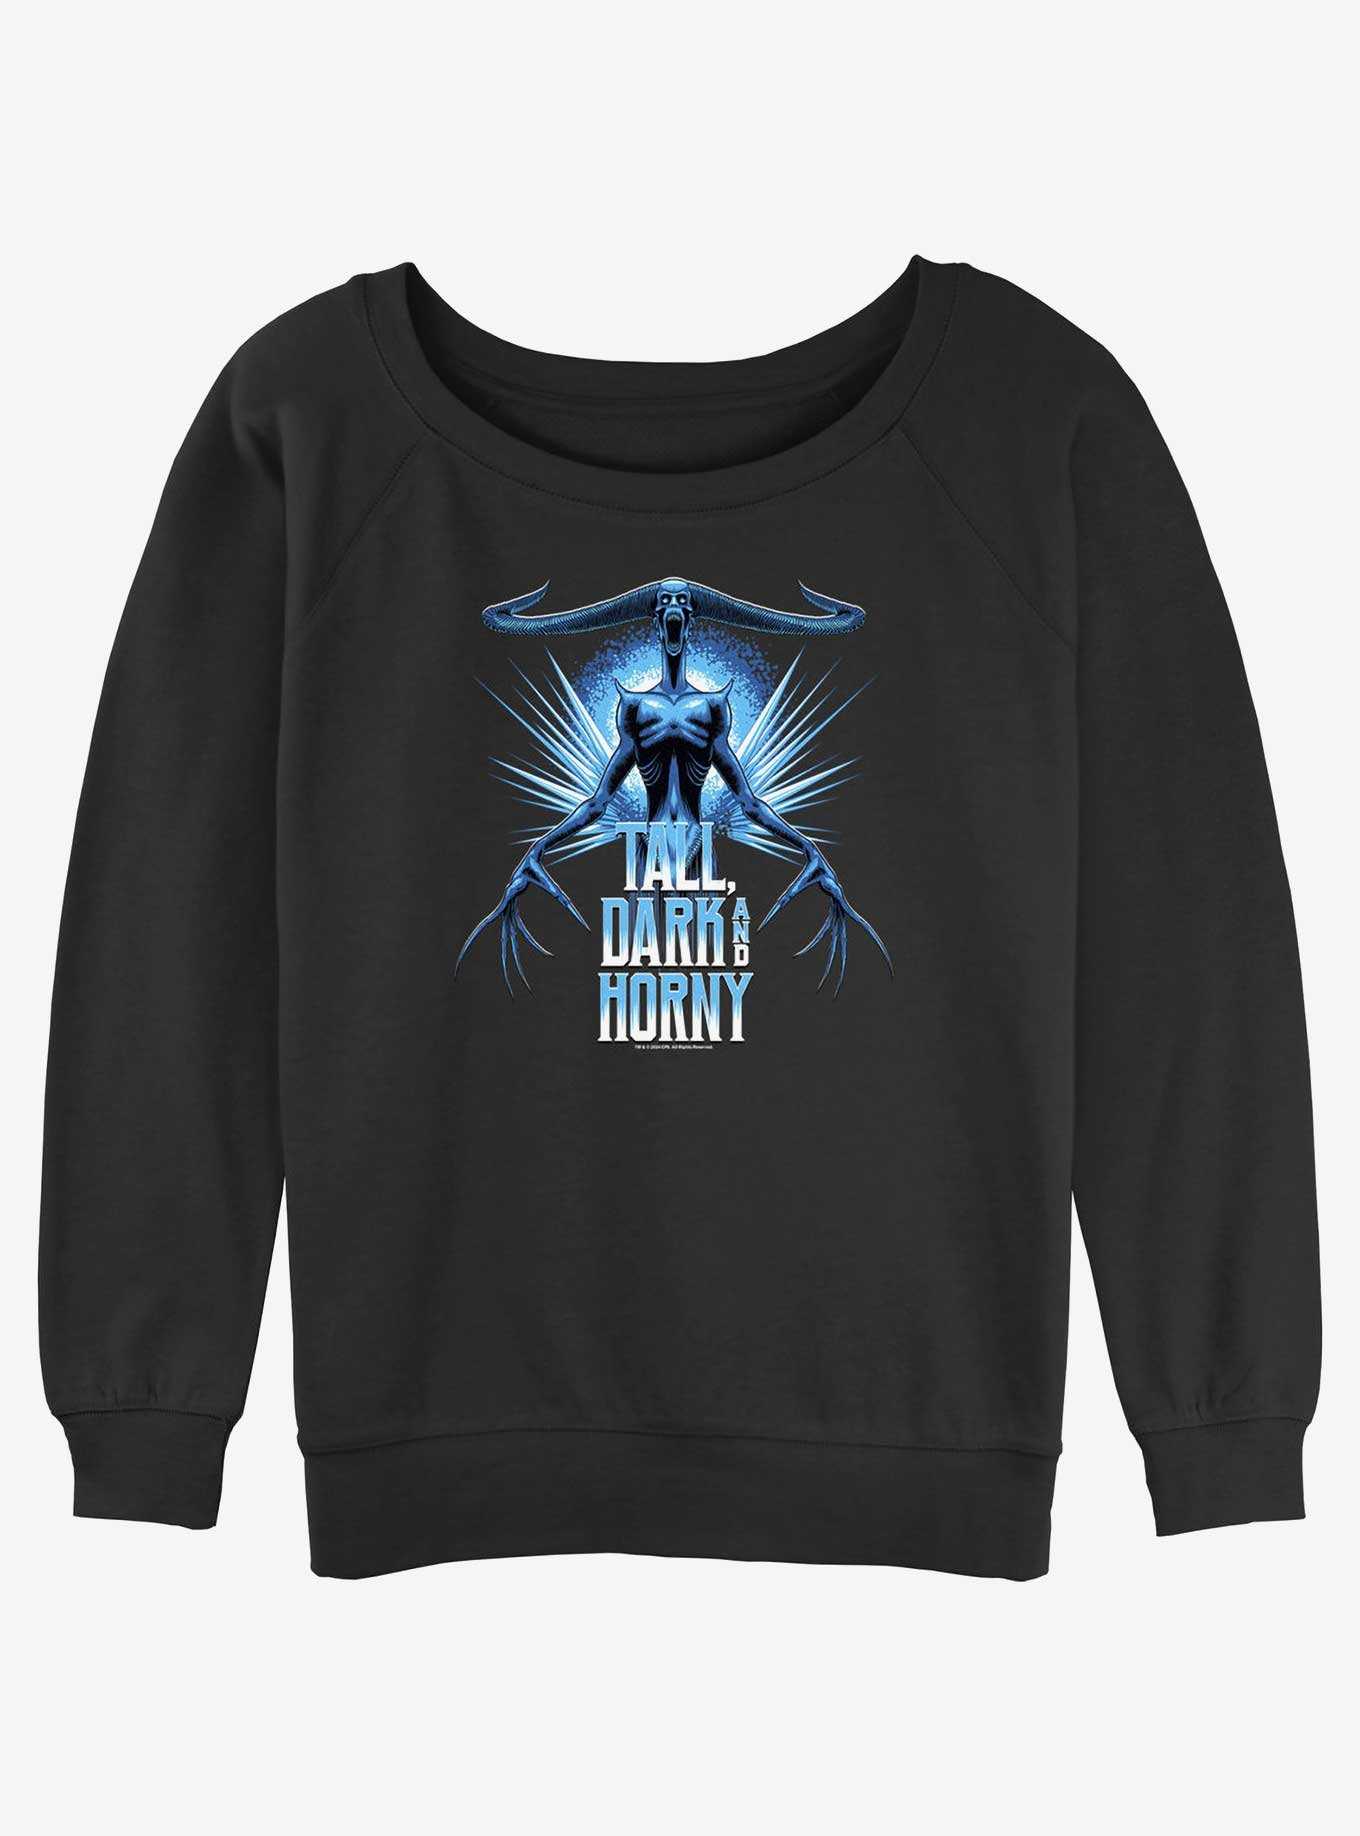 Ghostbusters: Frozen Empire Tall Dark And Horny Girls Slouchy Sweatshirt, , hi-res